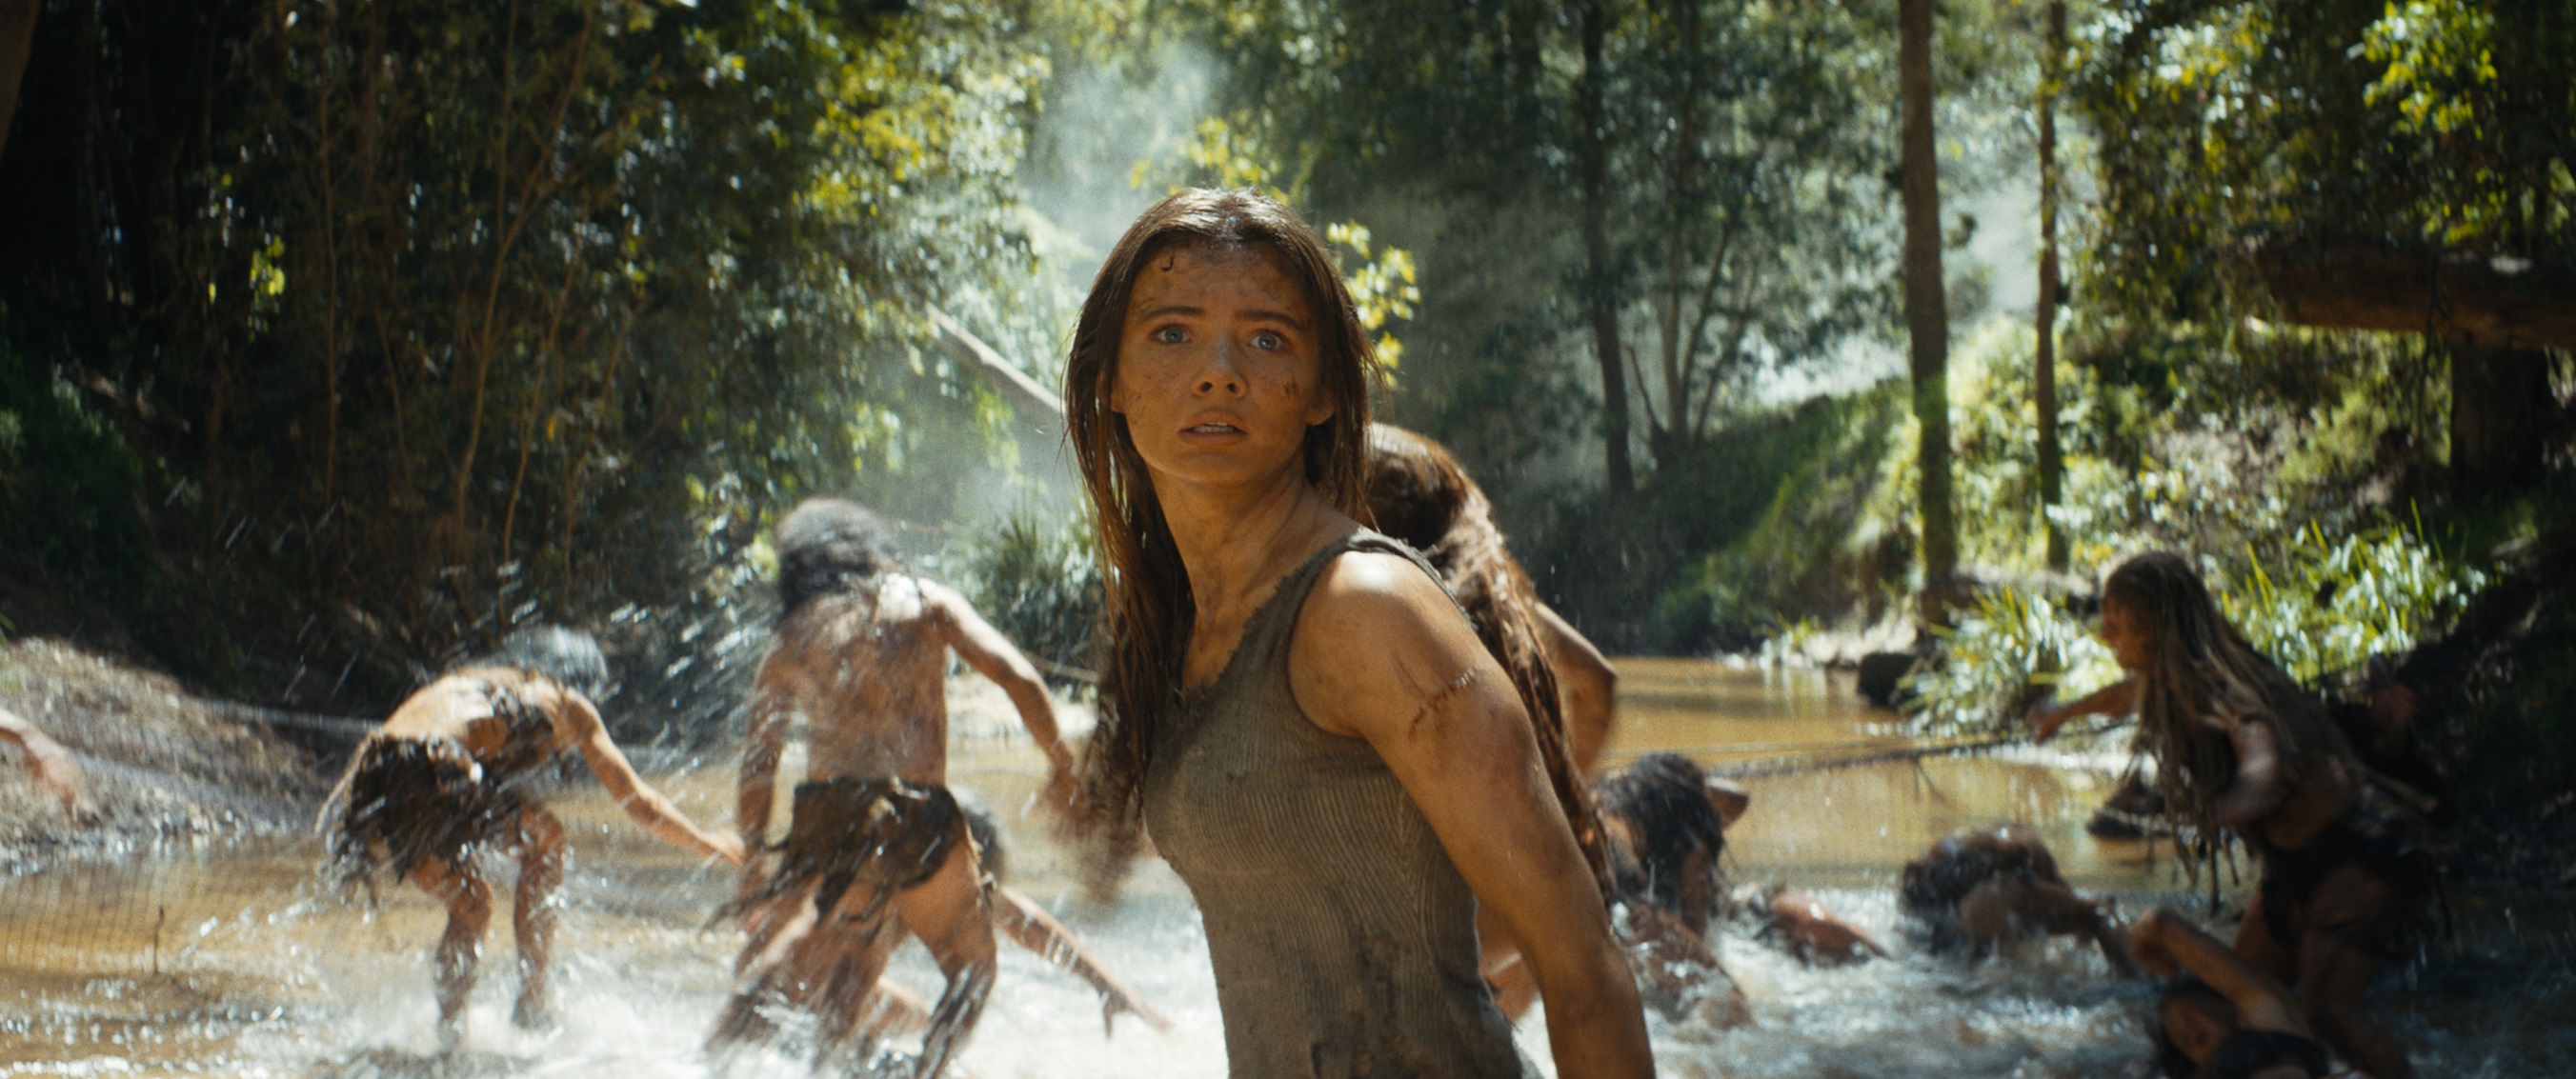 Freya Allan as Nova in Kingdom of the Planet of the Apes